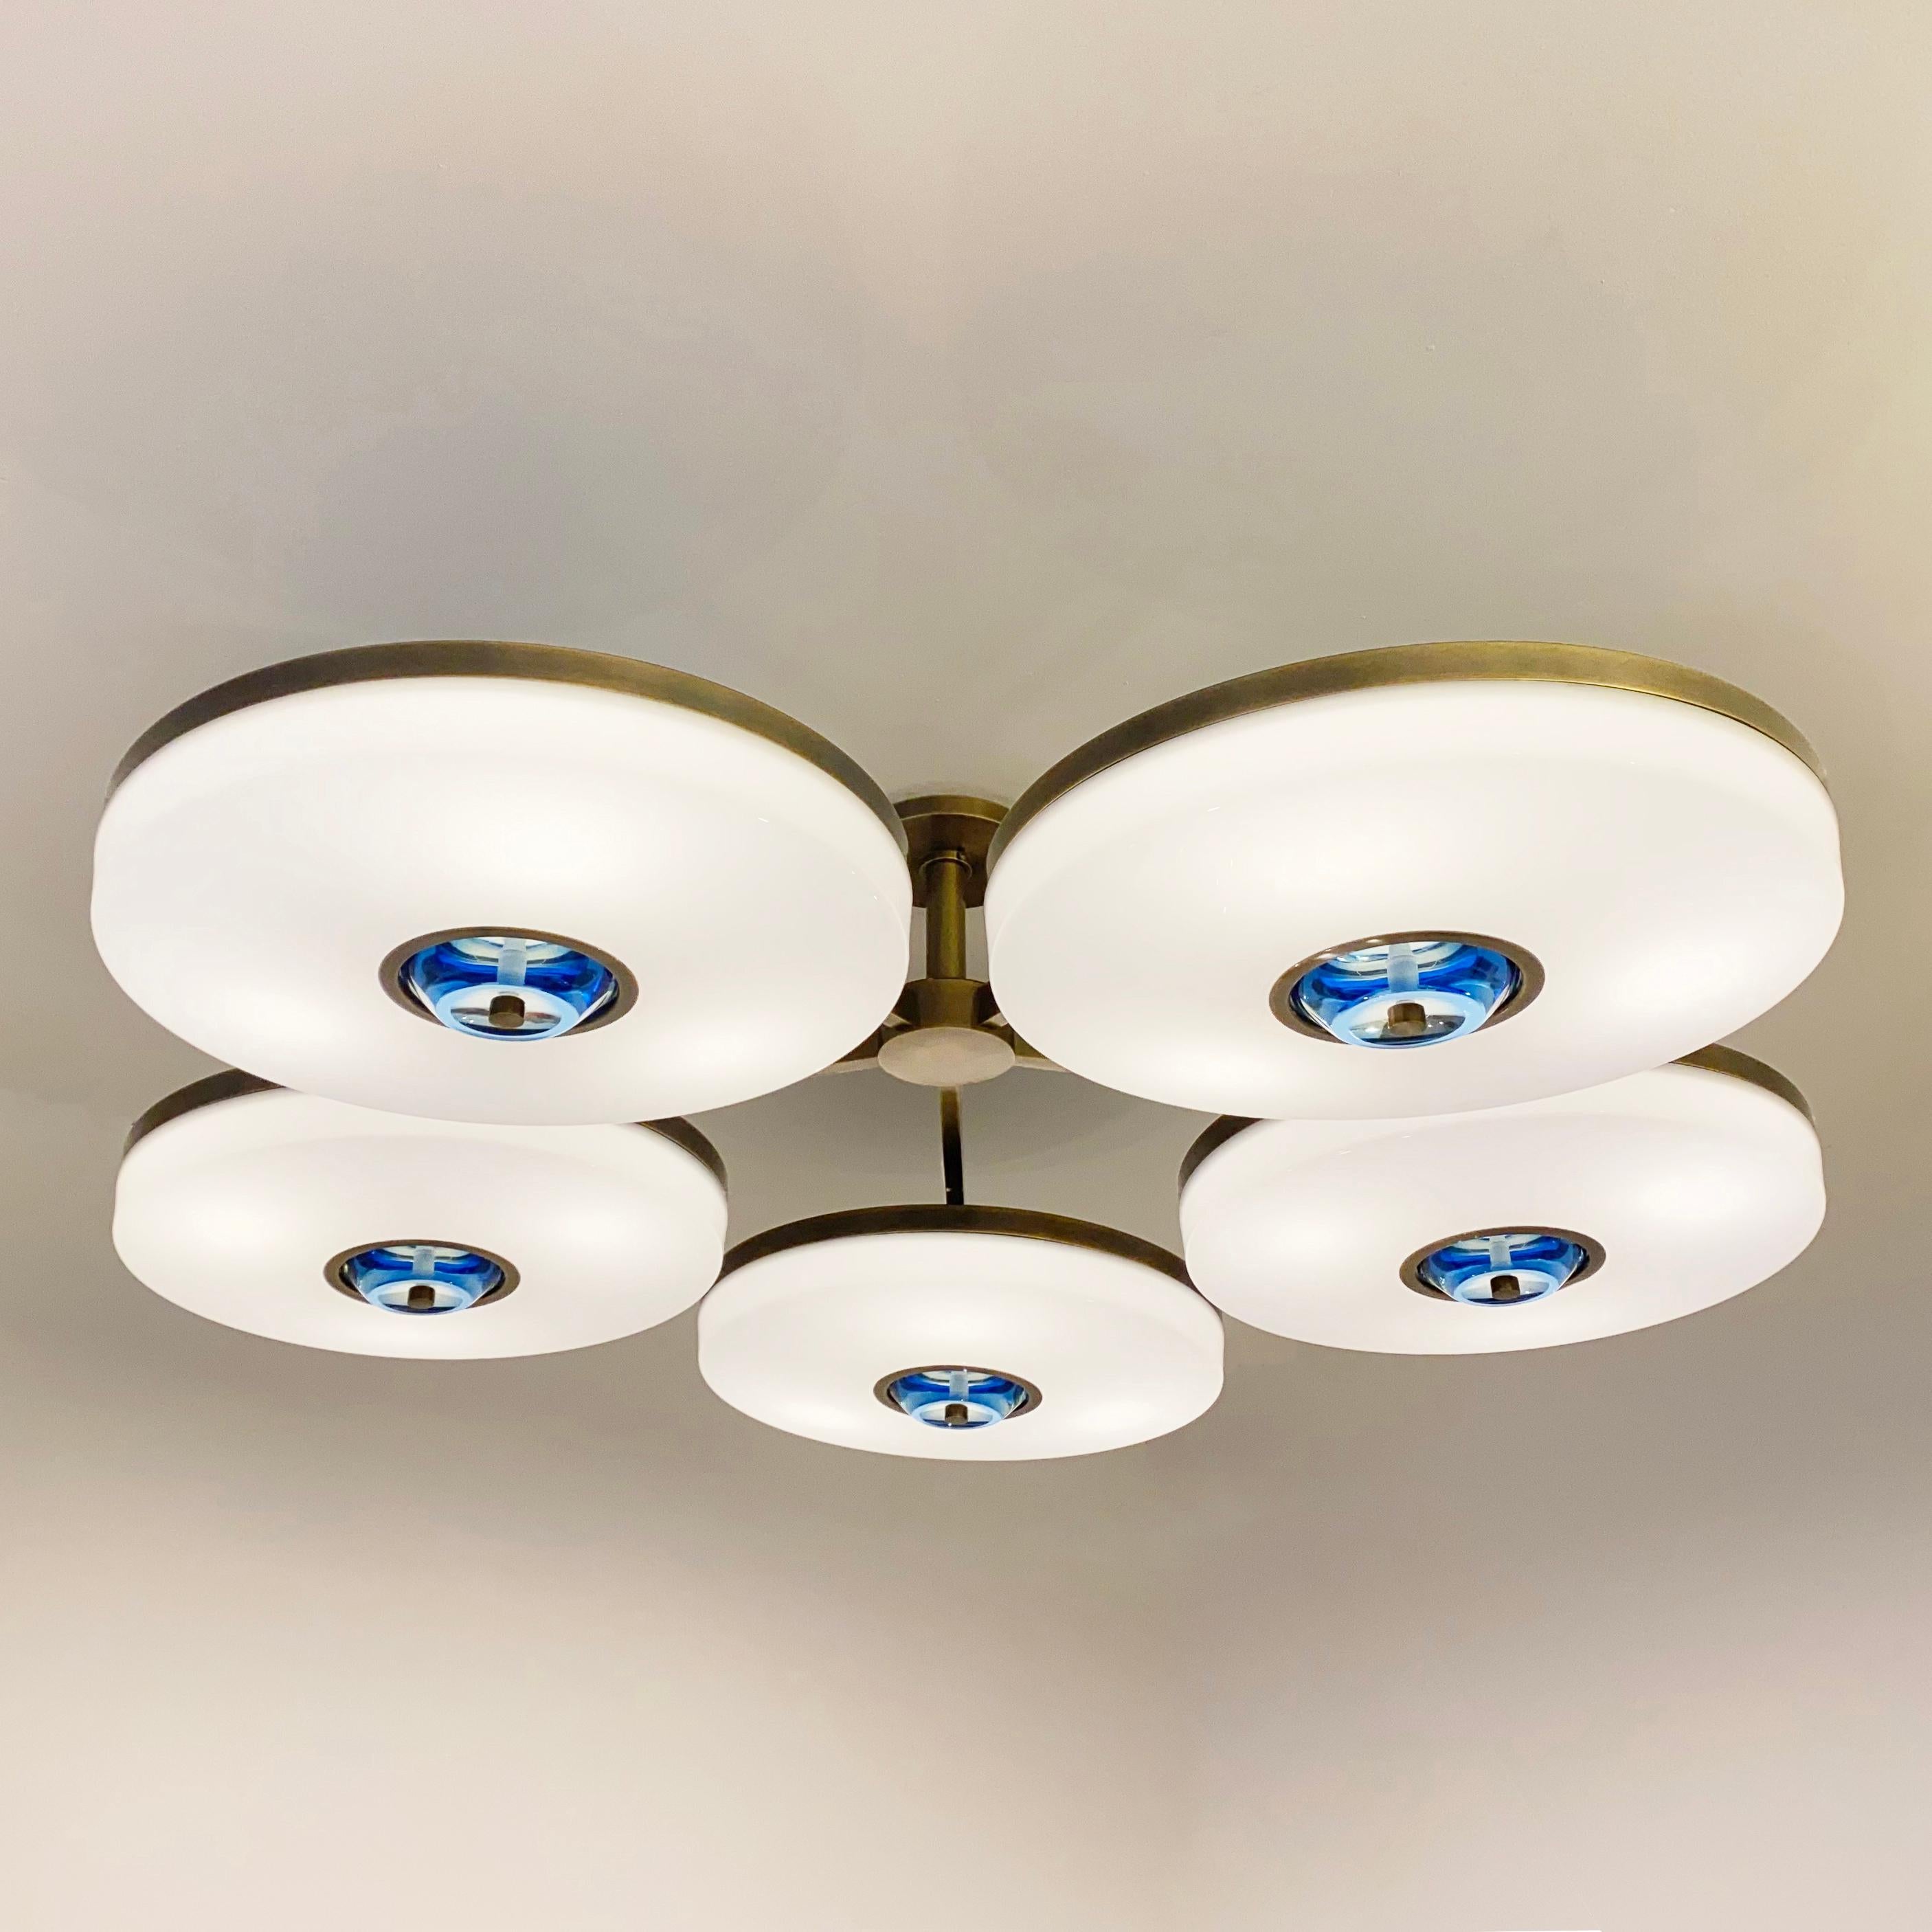 Iris N. 5 Ceiling Light by Gaspare Asaro-Satin Nickel Finish In New Condition For Sale In New York, NY